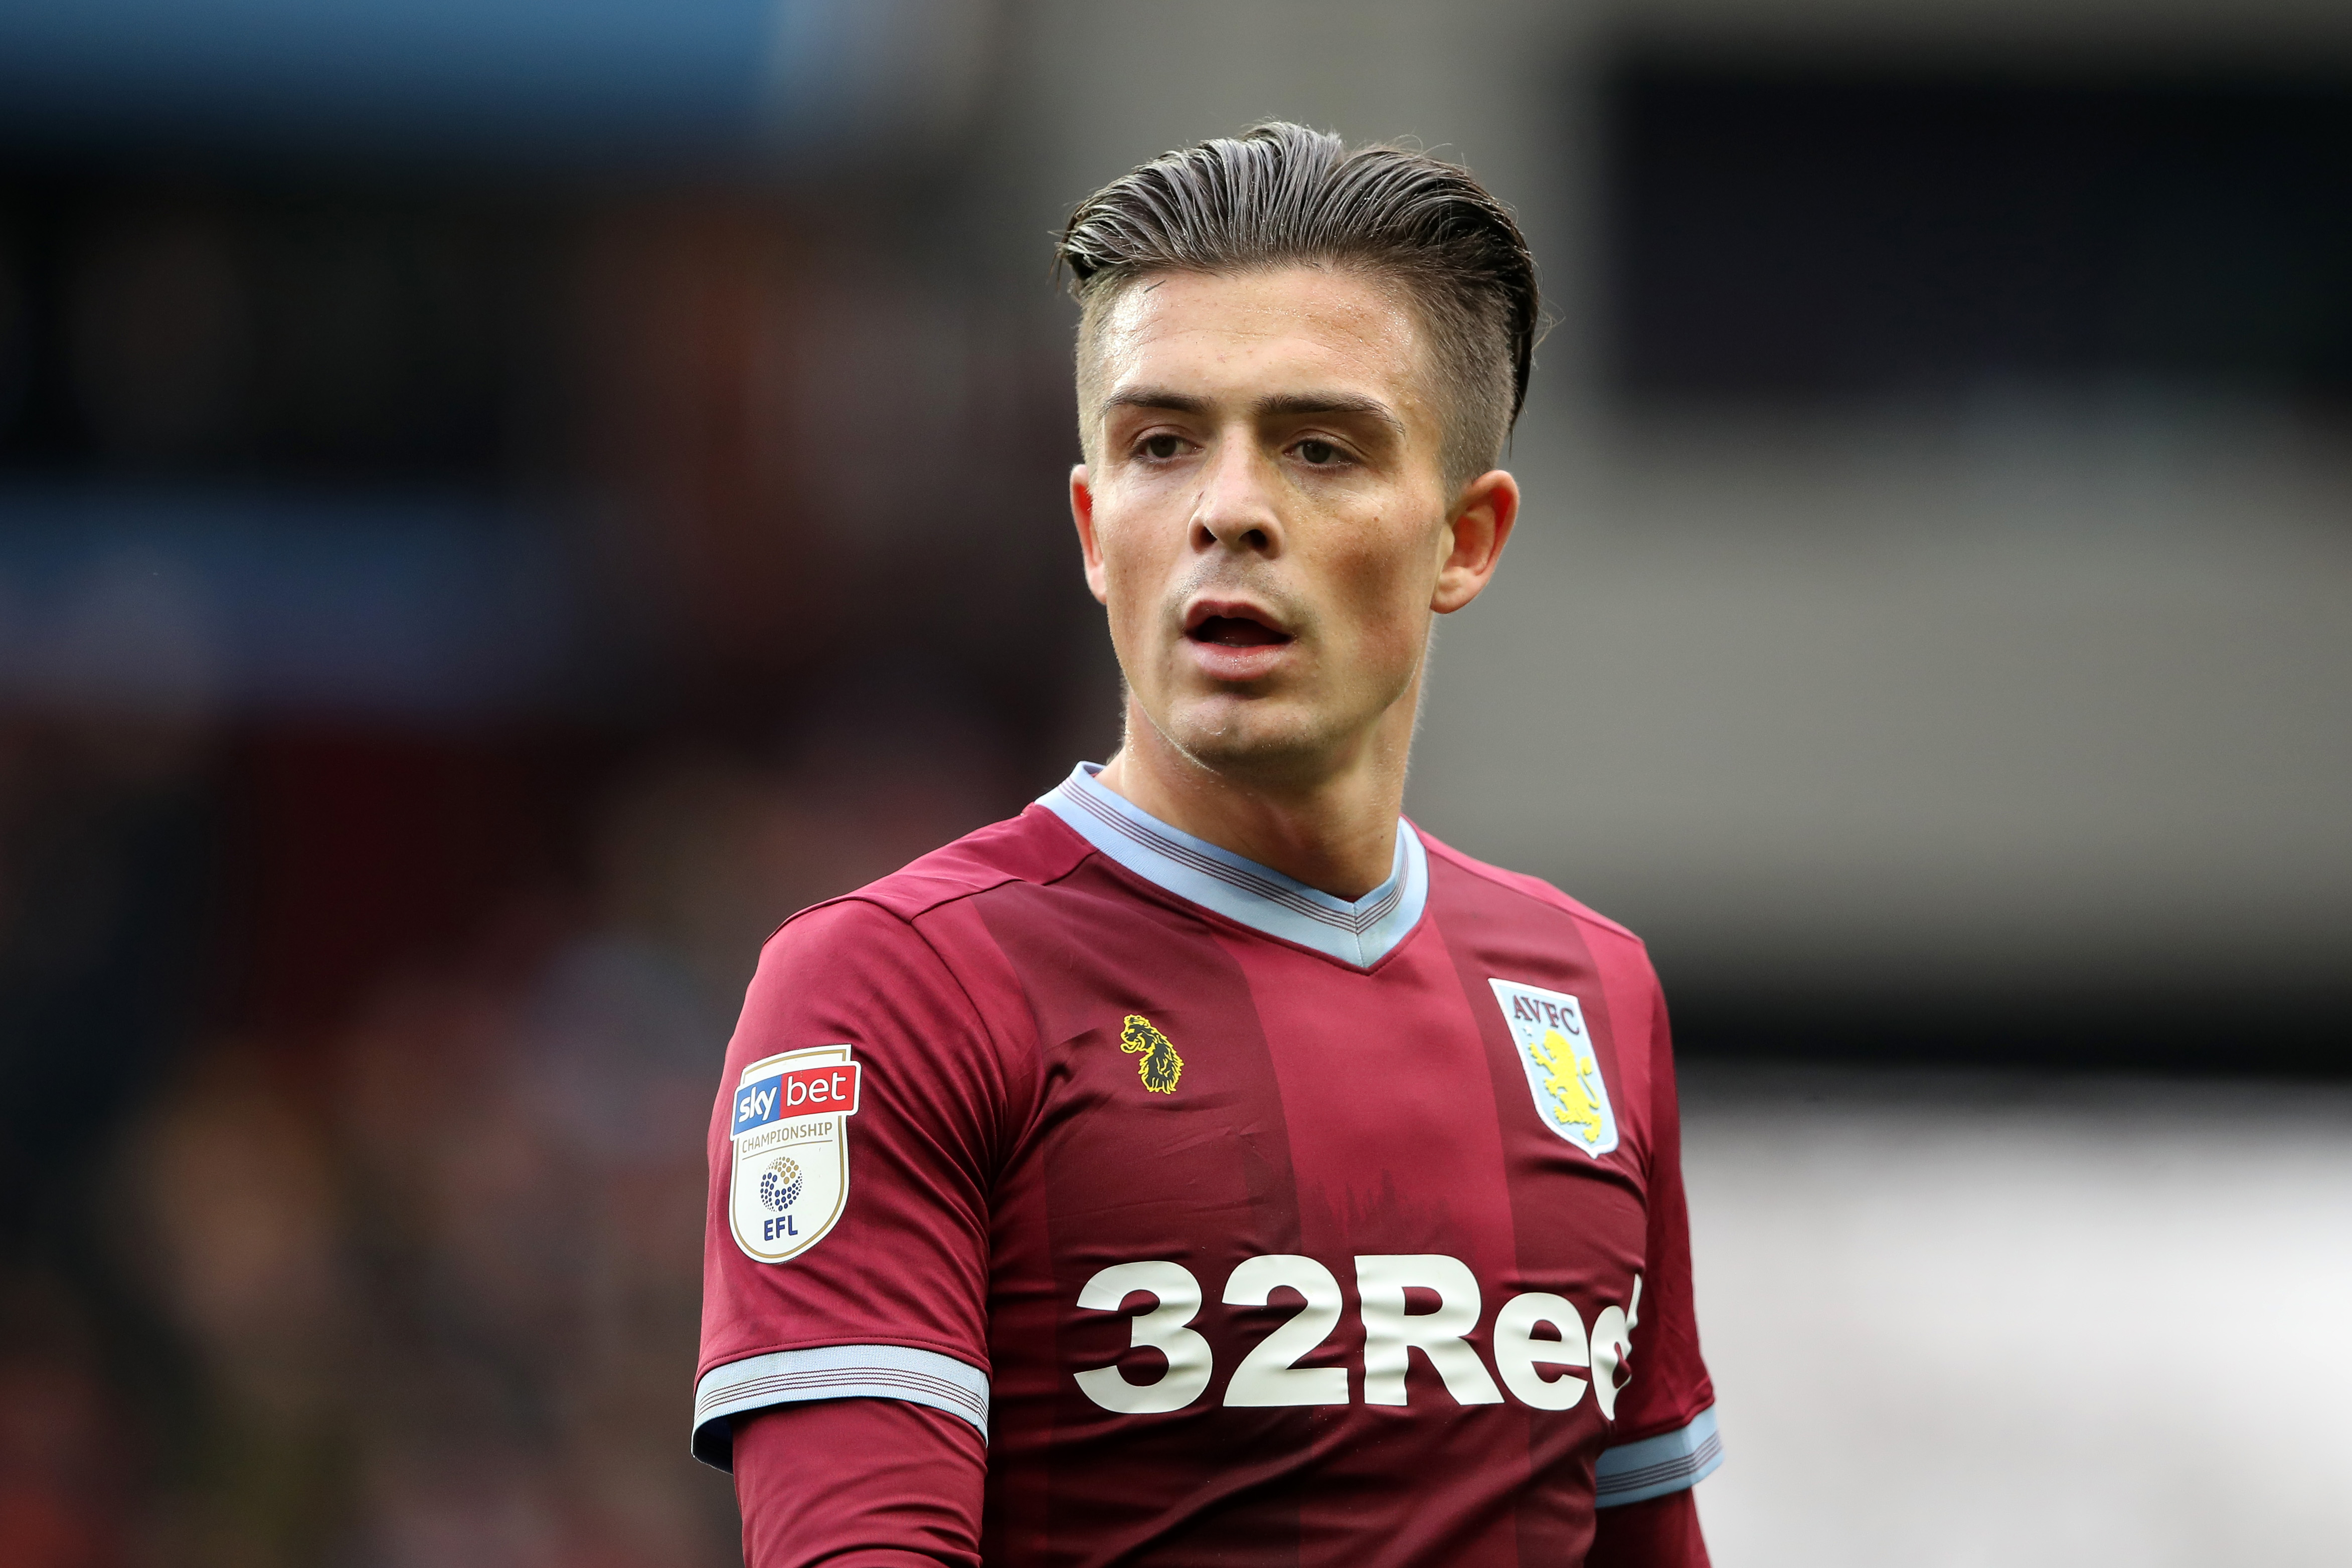 Jack Grealish in action for Aston Villa against Birmingham City in the Championship in November 2018.